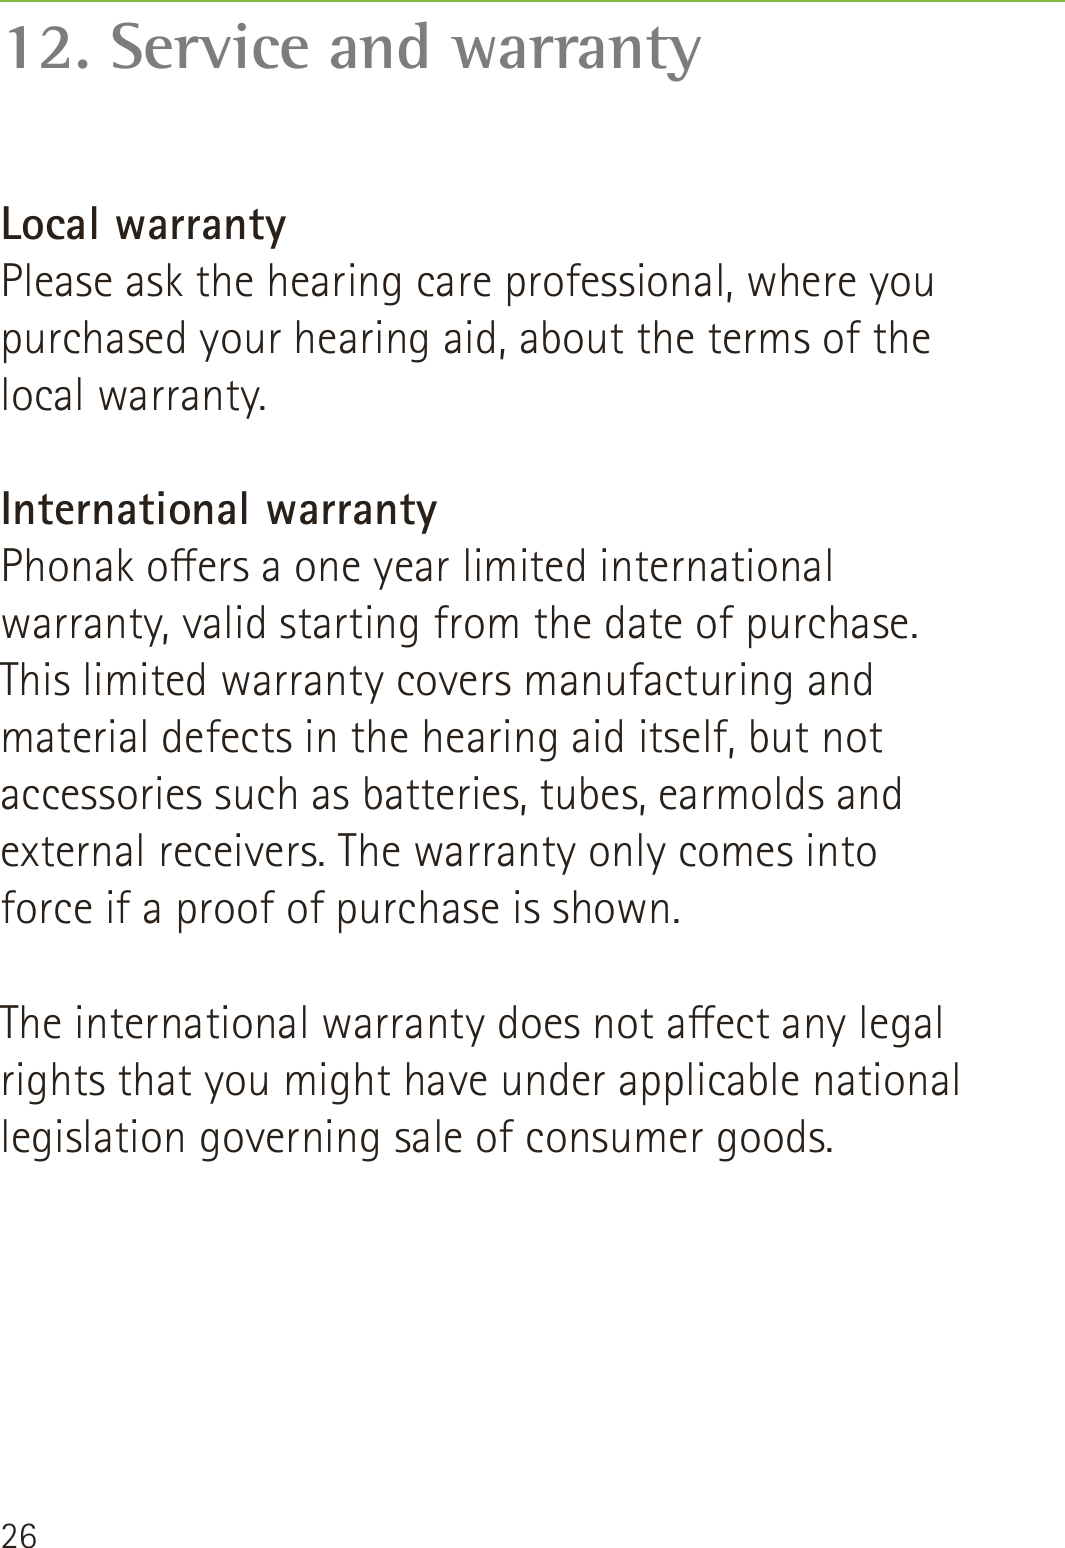 2612. Service and warrantyLocal warrantyPlease ask the hearing care professional, where you purchased your hearing aid, about the terms of the local warranty.International warrantyPhonak oers a one year limited international warranty, valid starting from the date of purchase. This limited warranty covers manufacturing and material defects in the hearing aid itself, but not accessories such as batteries, tubes, earmolds and external receivers. The warranty only comes into force if a proof of purchase is shown.The international warranty does not aect any legal rights that you might have under applicable national legislation governing sale of consumer goods.